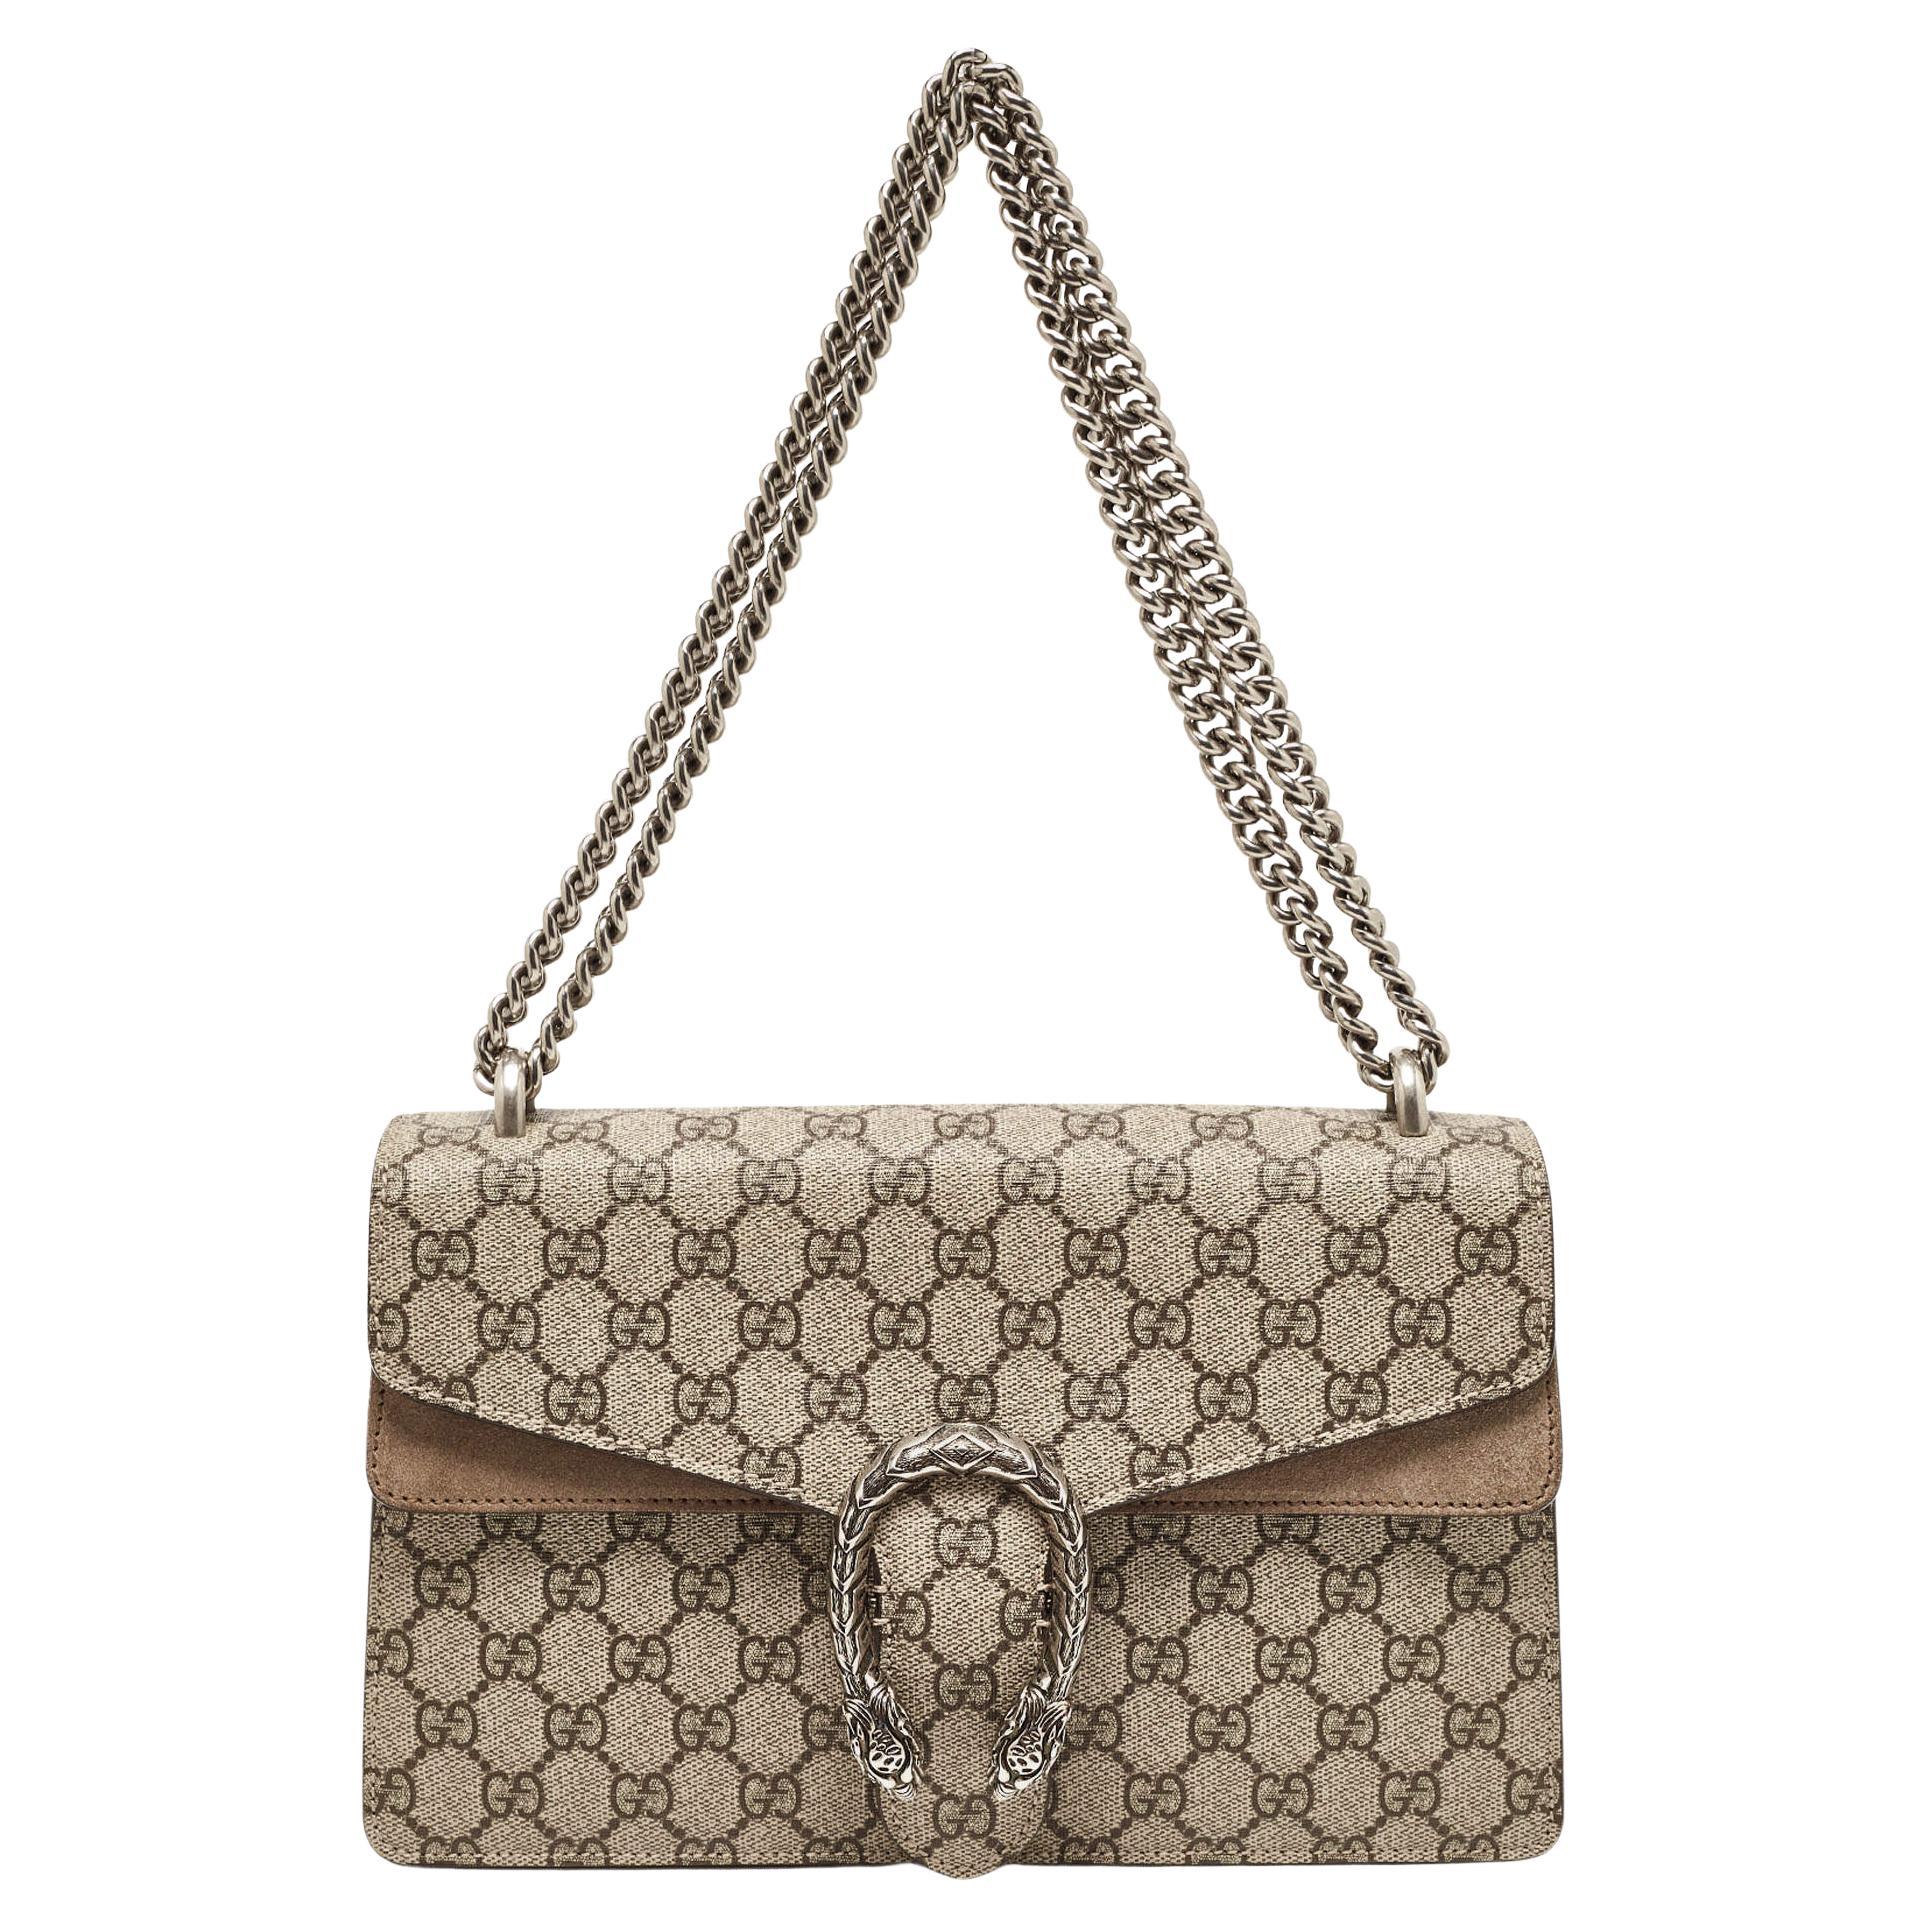 Gucci Beige GG Supreme Canvas and Suede Small Dionysus Shoulder Bag For Sale